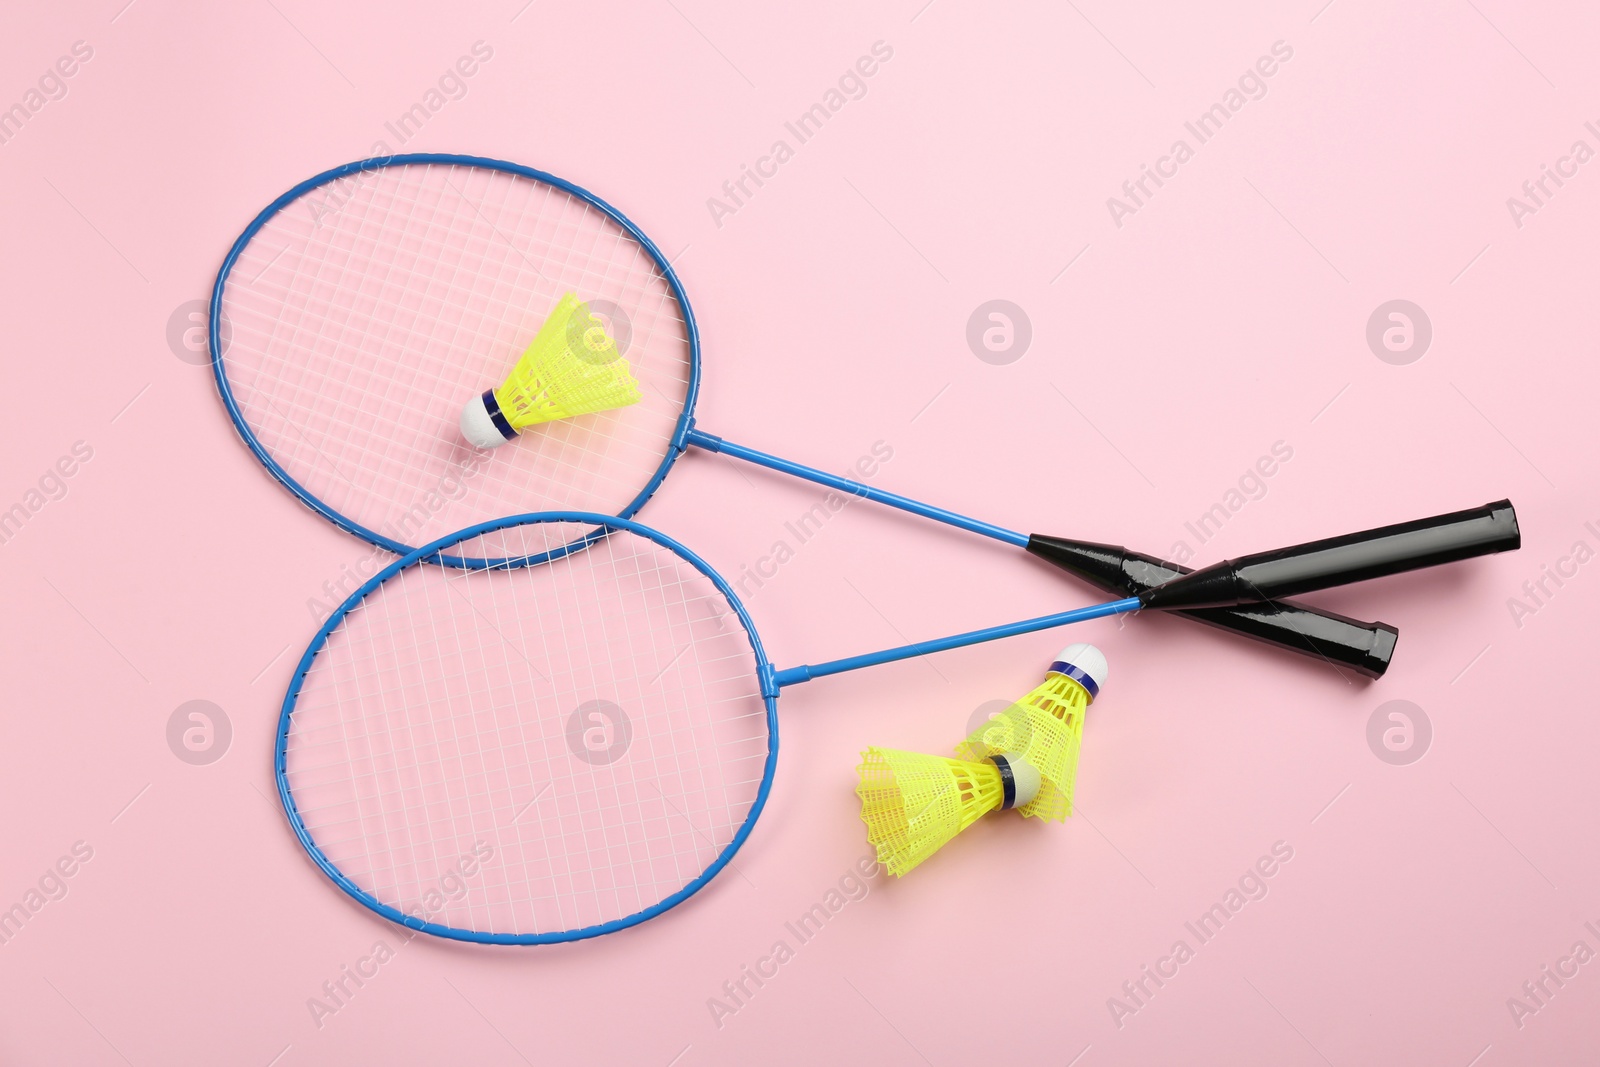 Photo of Rackets and shuttlecocks on pink background, flat lay. Badminton equipment